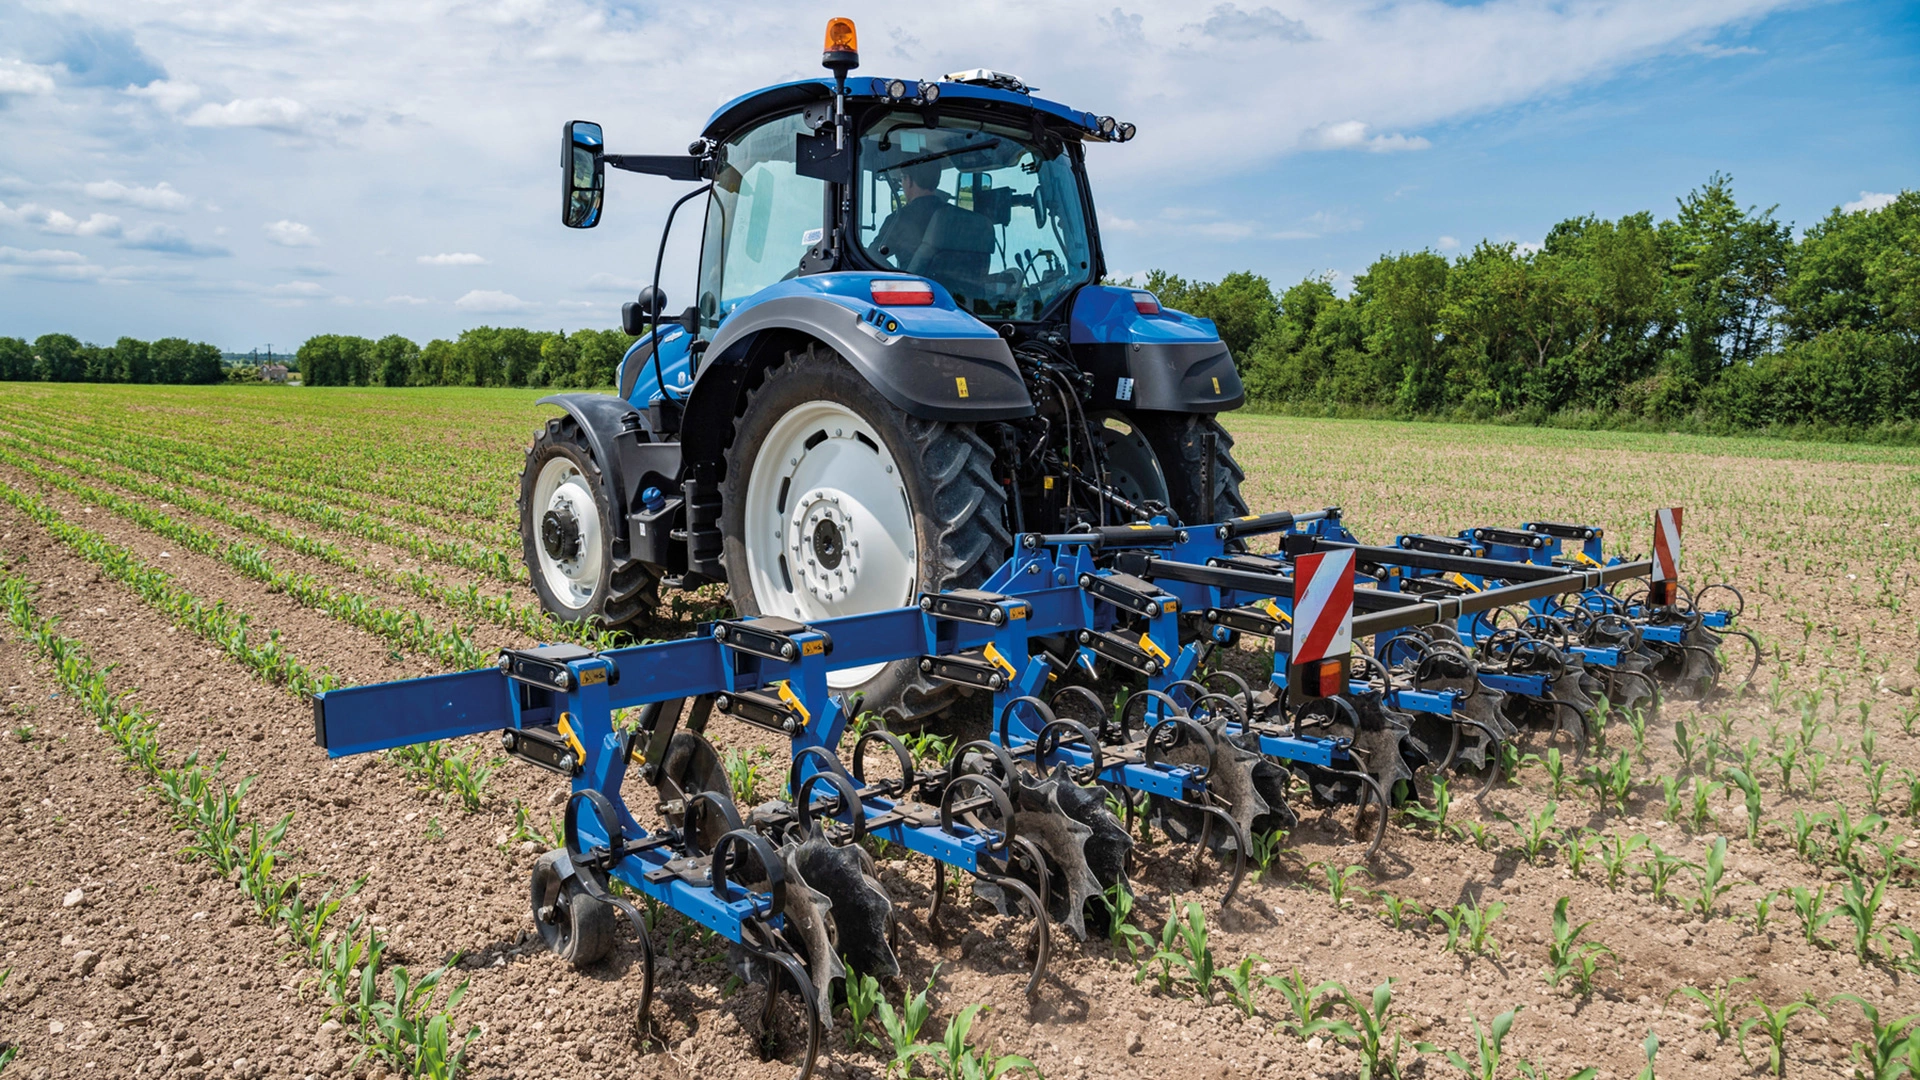 Tractor-mounted Interrow Cultivators actively working between crop rows for weed control on the field